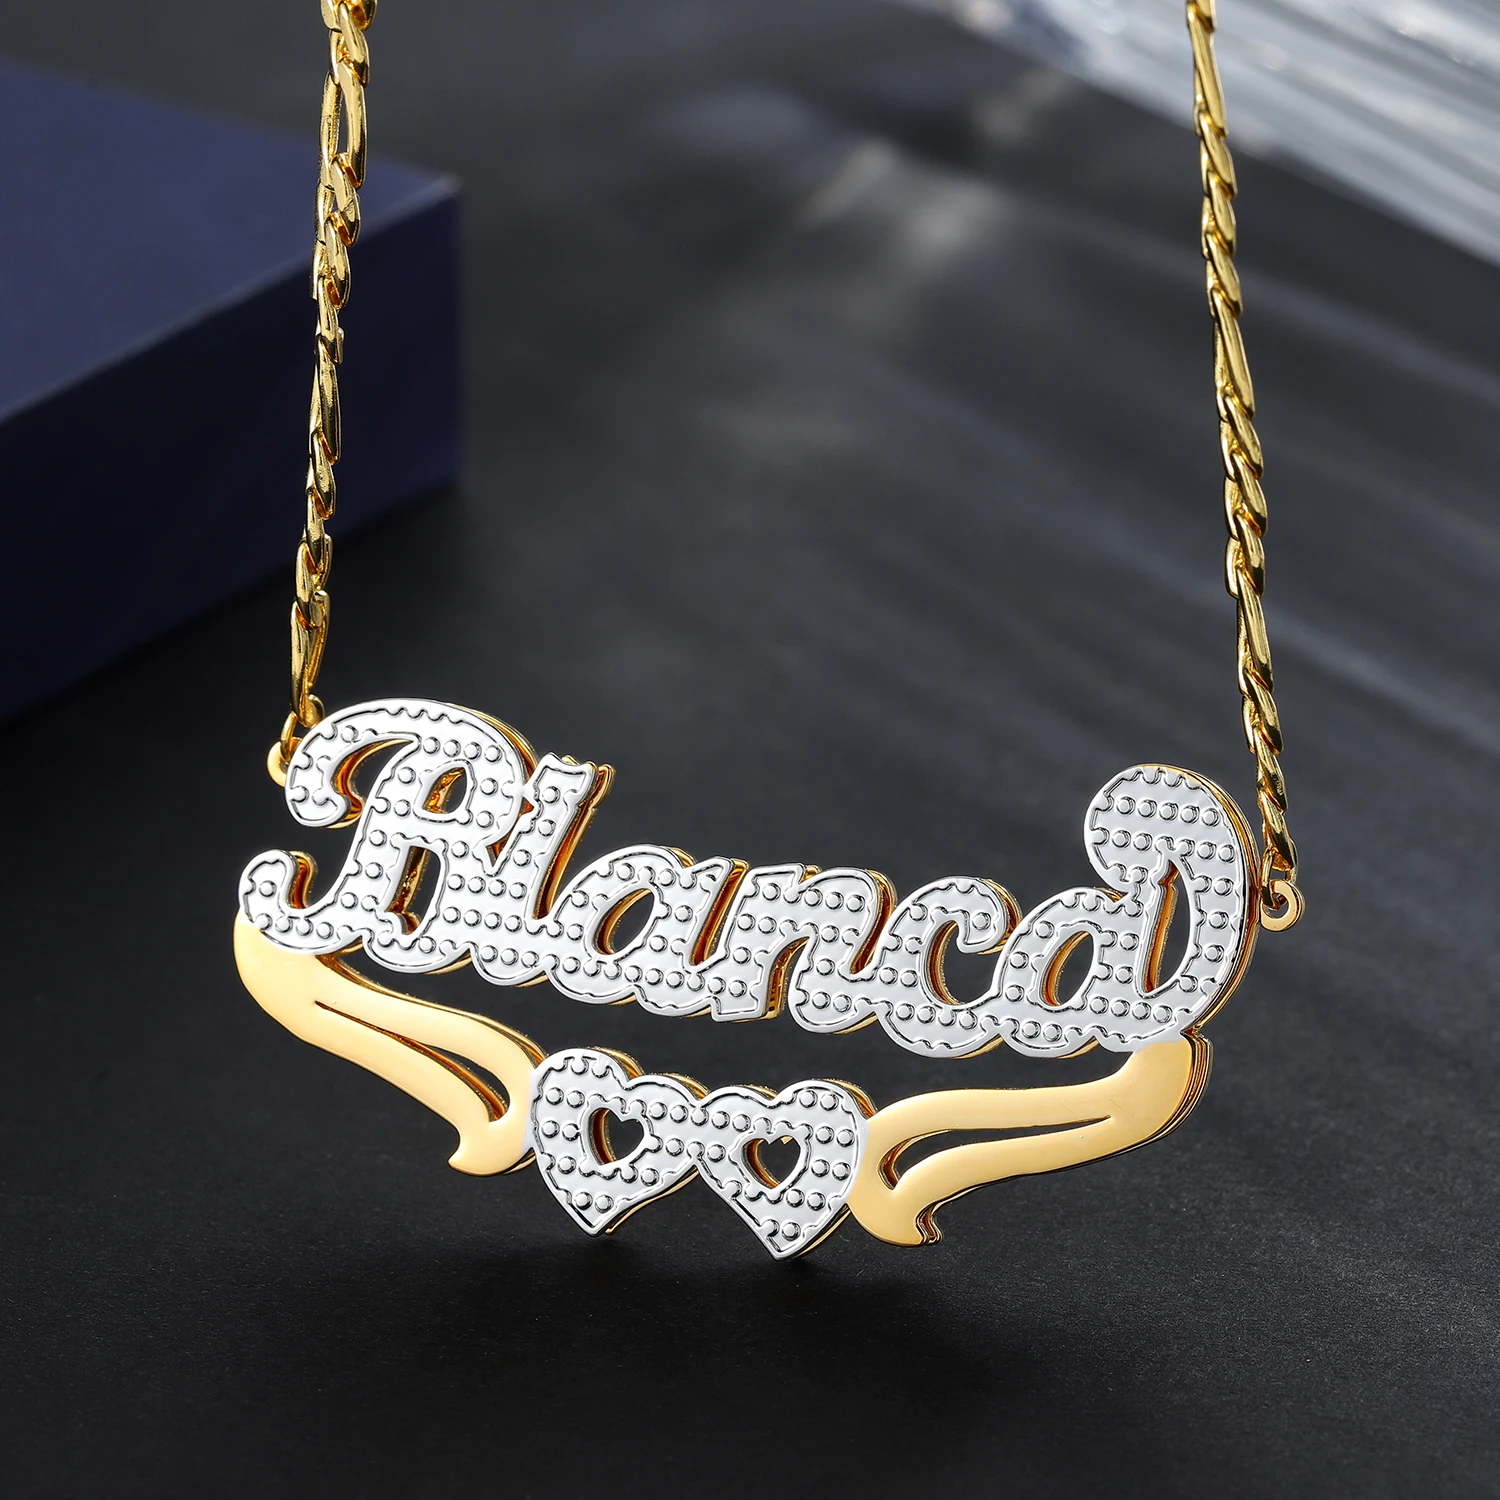 New Customized Double Plated Heart Name Necklace For Women Personalized Gold Stainless Steel Name Pendant Chain Jewelry Gifts